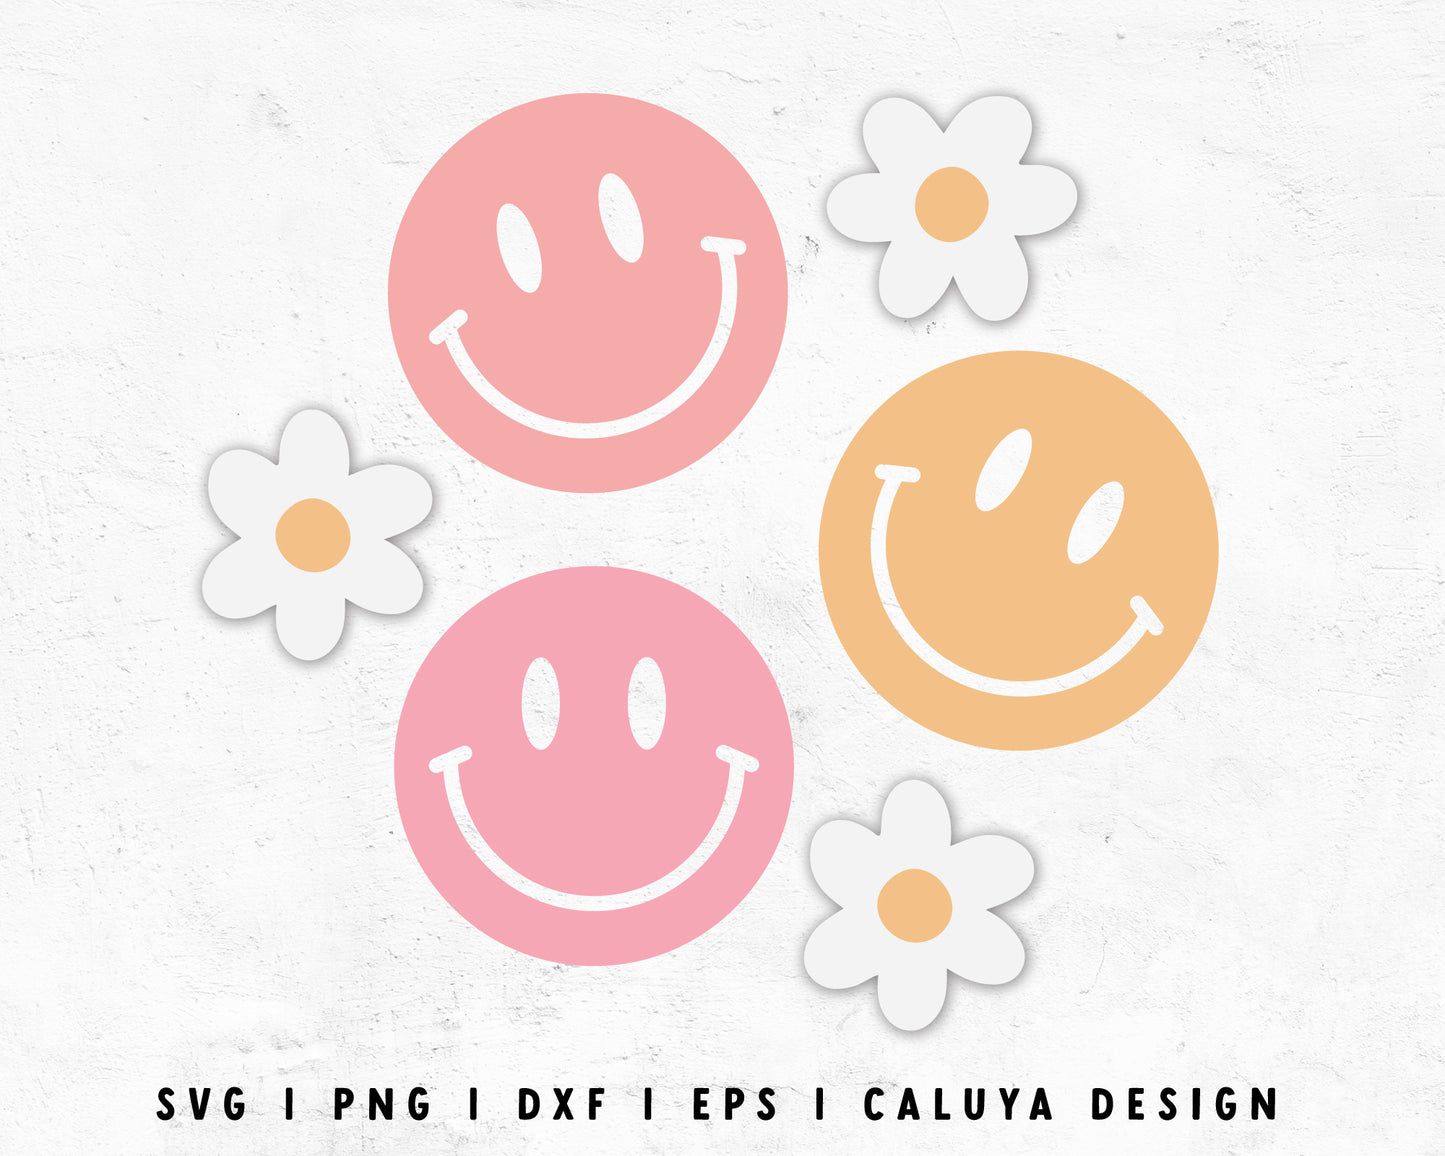 FREE Retro Smiley Face SVG | 70s Groovy Flower SVG Cut File for Cricut, Cameo Silhouette | Free SVG Cut File